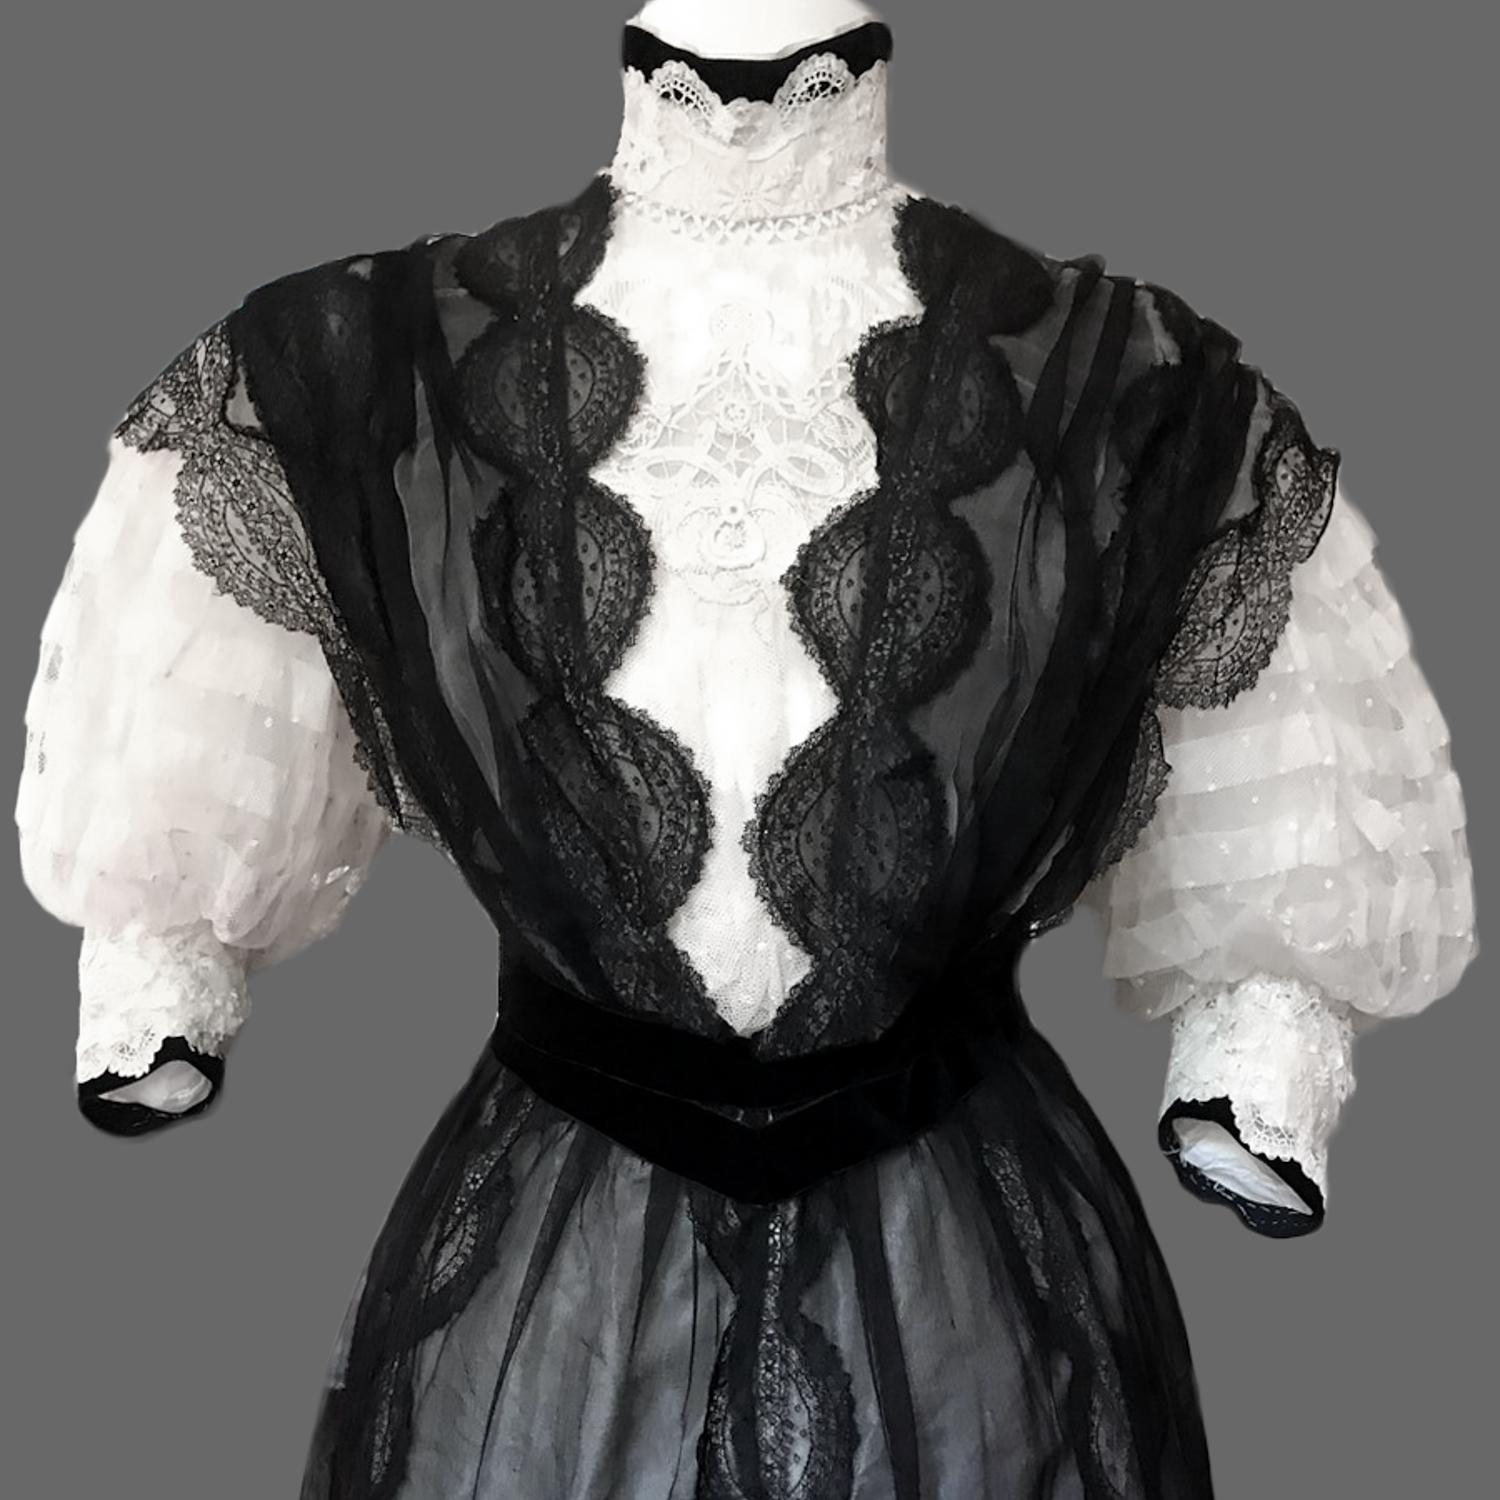 Circa 1895/1905
France

A French Tea-Gown with train in black and white muslin and lace dating from the French Belle Epoque or Edwardian Period. Background in black muslin sewn with lace arranged in river. Boned bodice with a waistband without